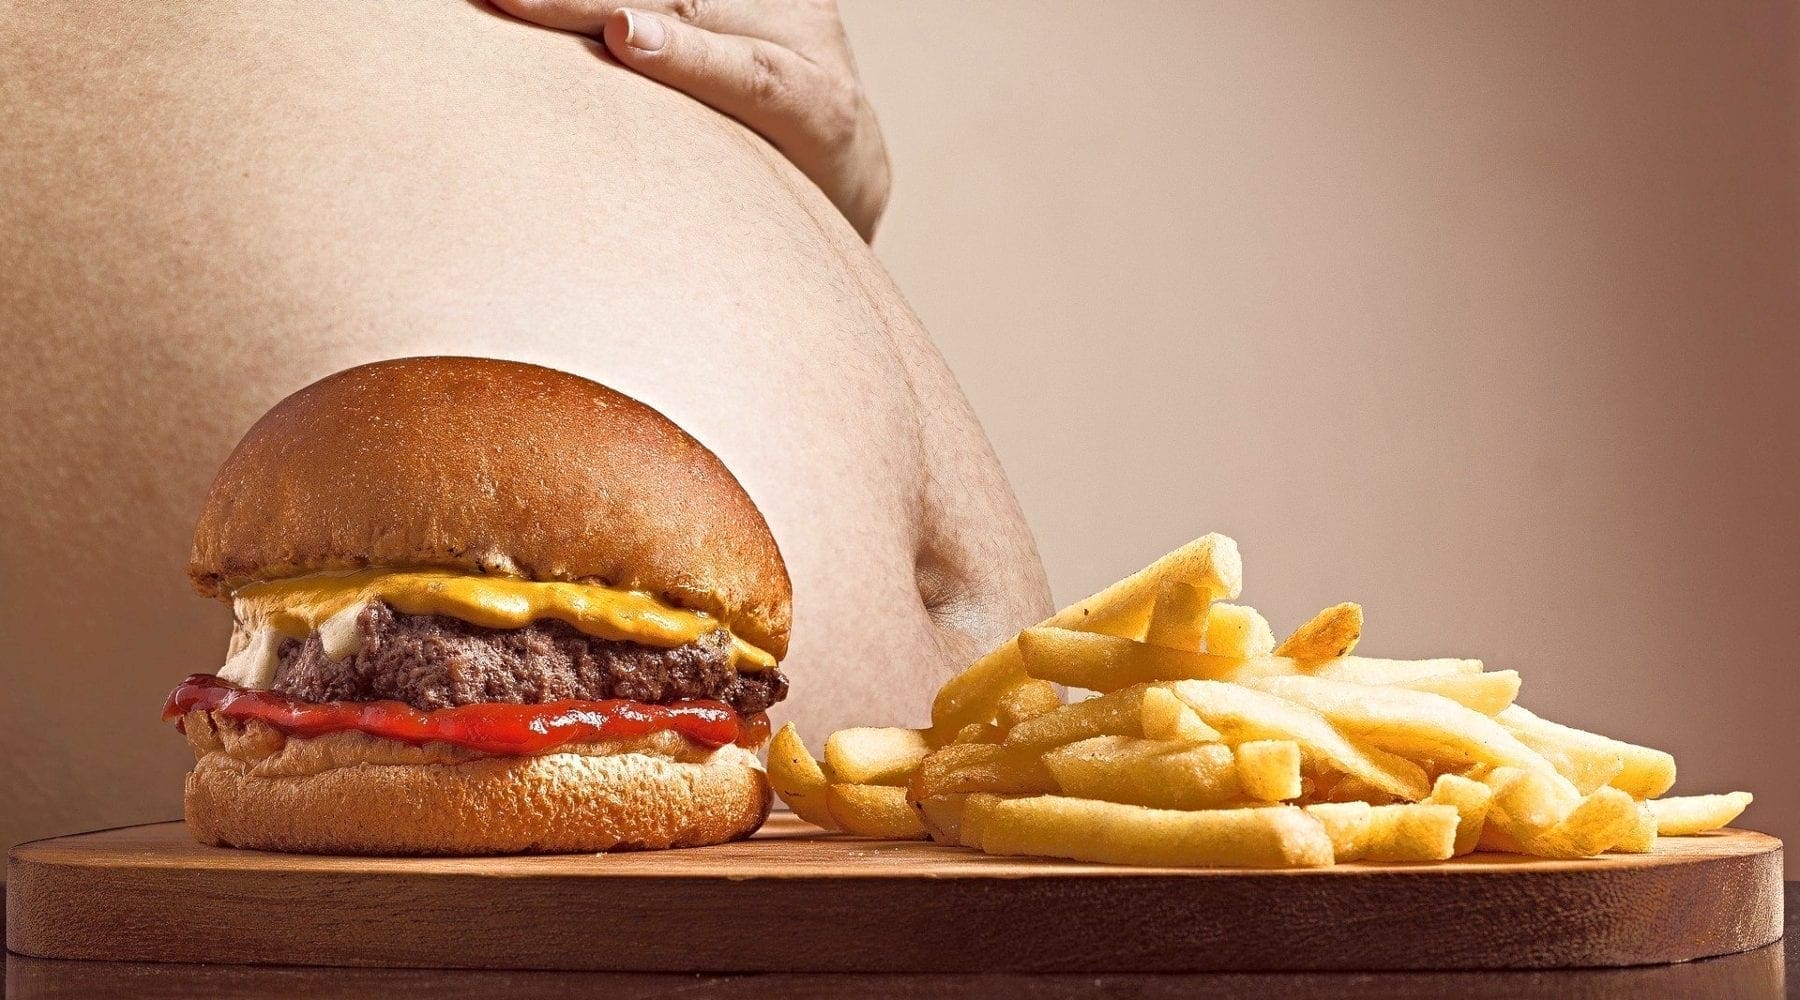 Obesity Responsible for 4 Million Global Deaths Annually